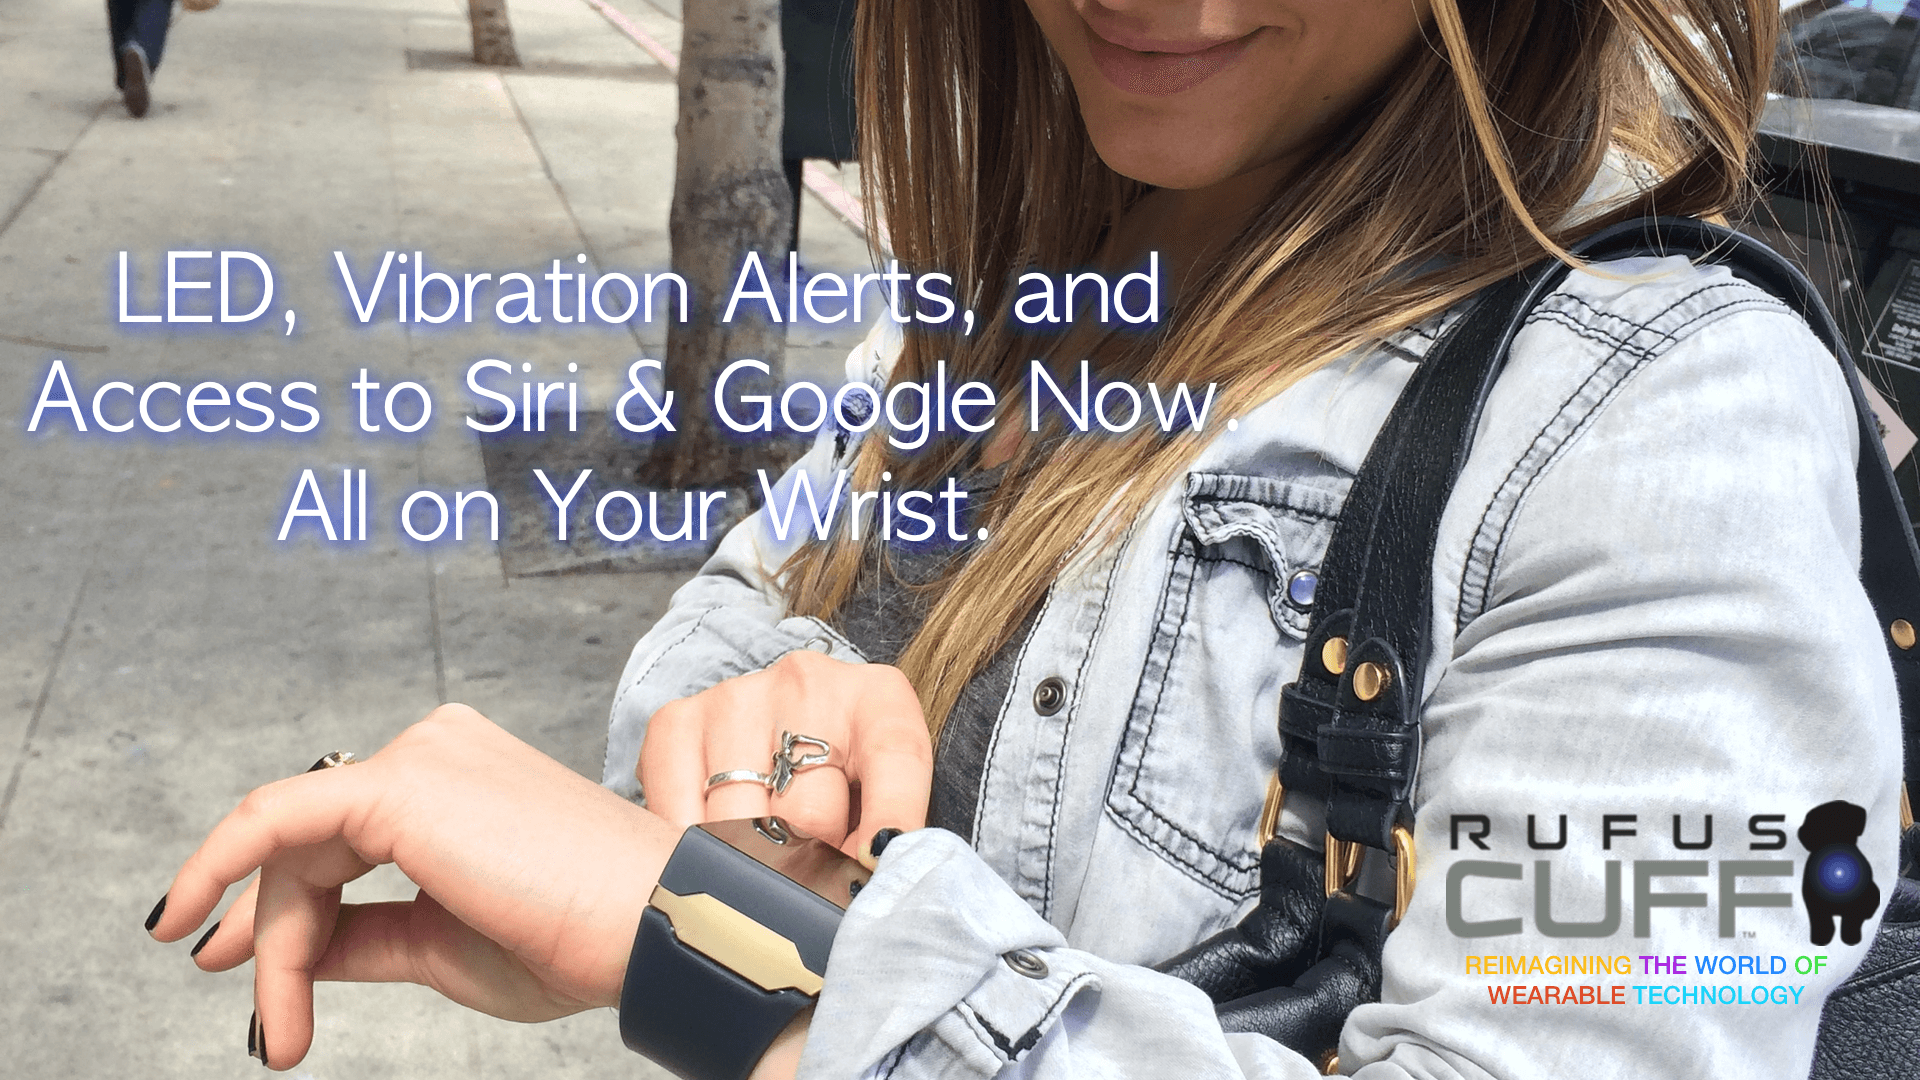 You’ll Love This Wrist Communicator Which Can Do Everything Your Smartphone’s Doing